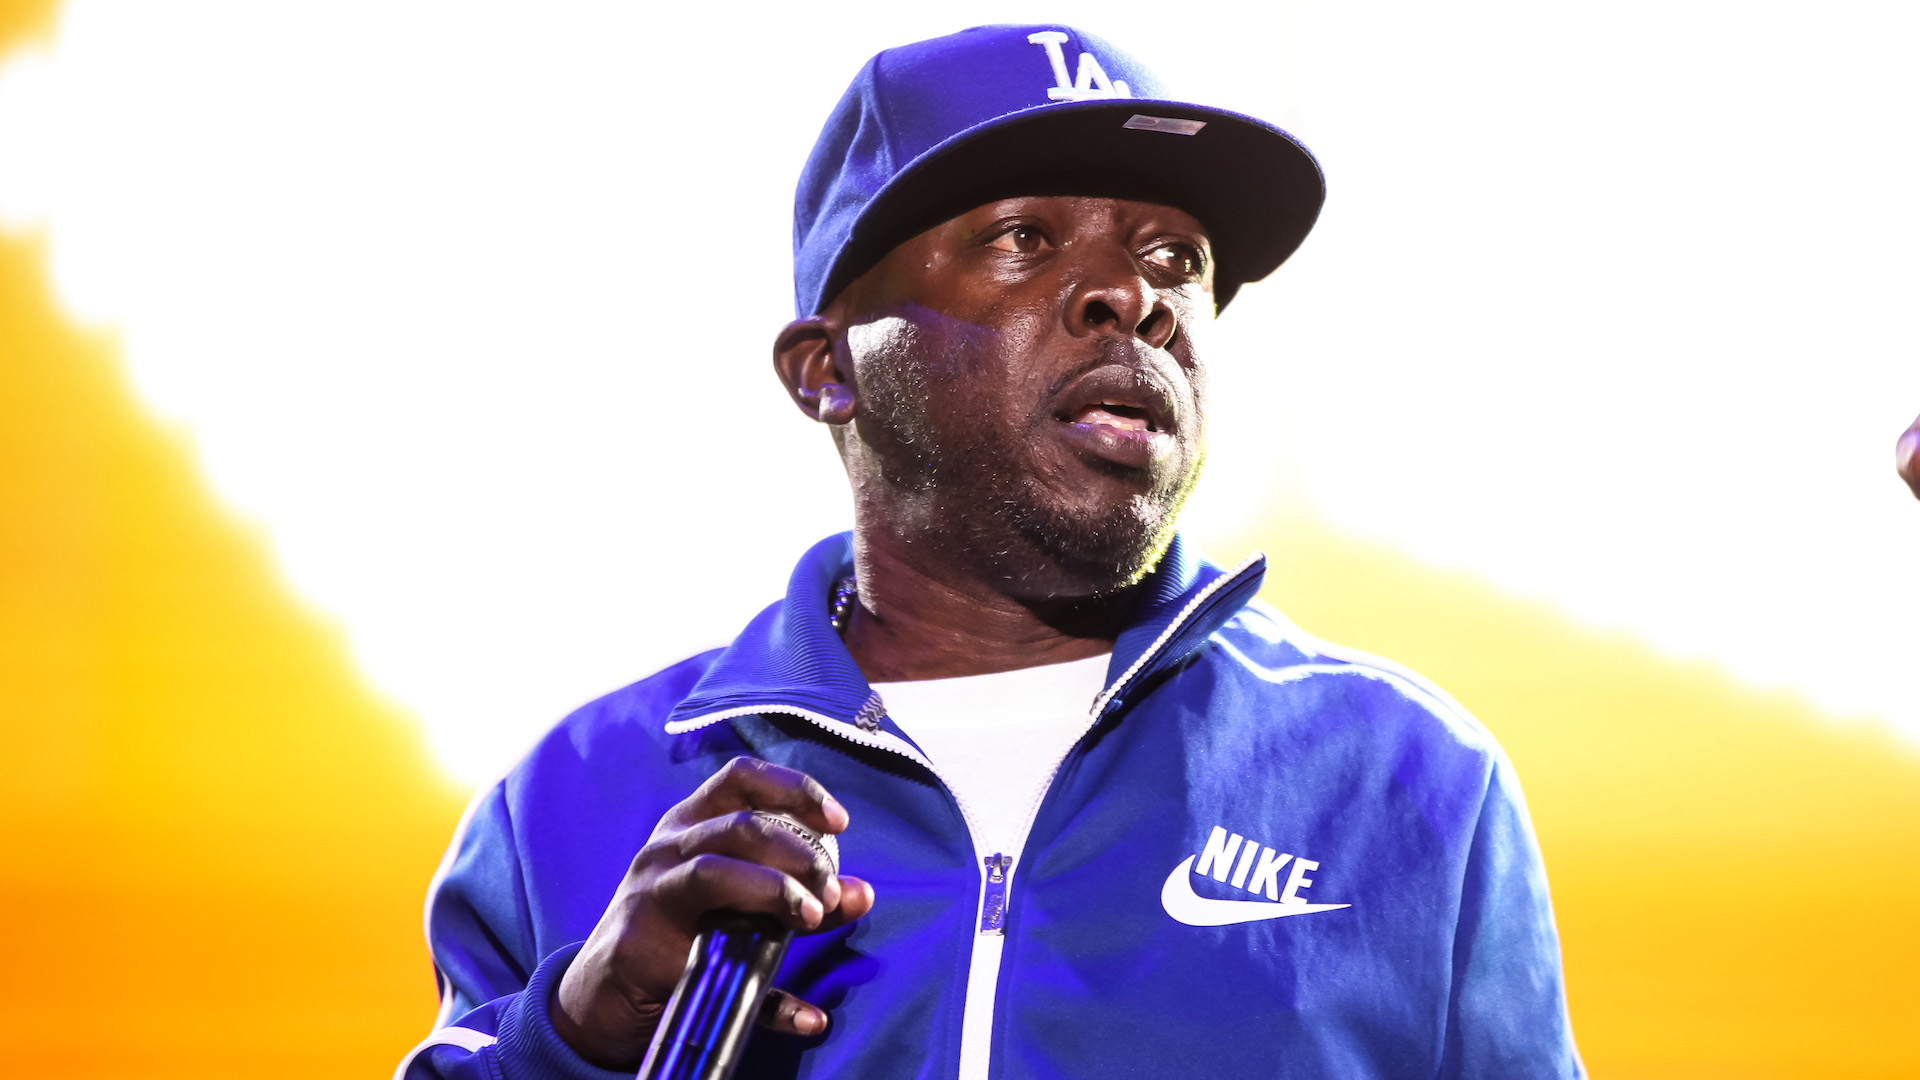 Listen to Phife Dawg's New Song "Nutshell Part 2" f/ Busta Rhymes and Redman